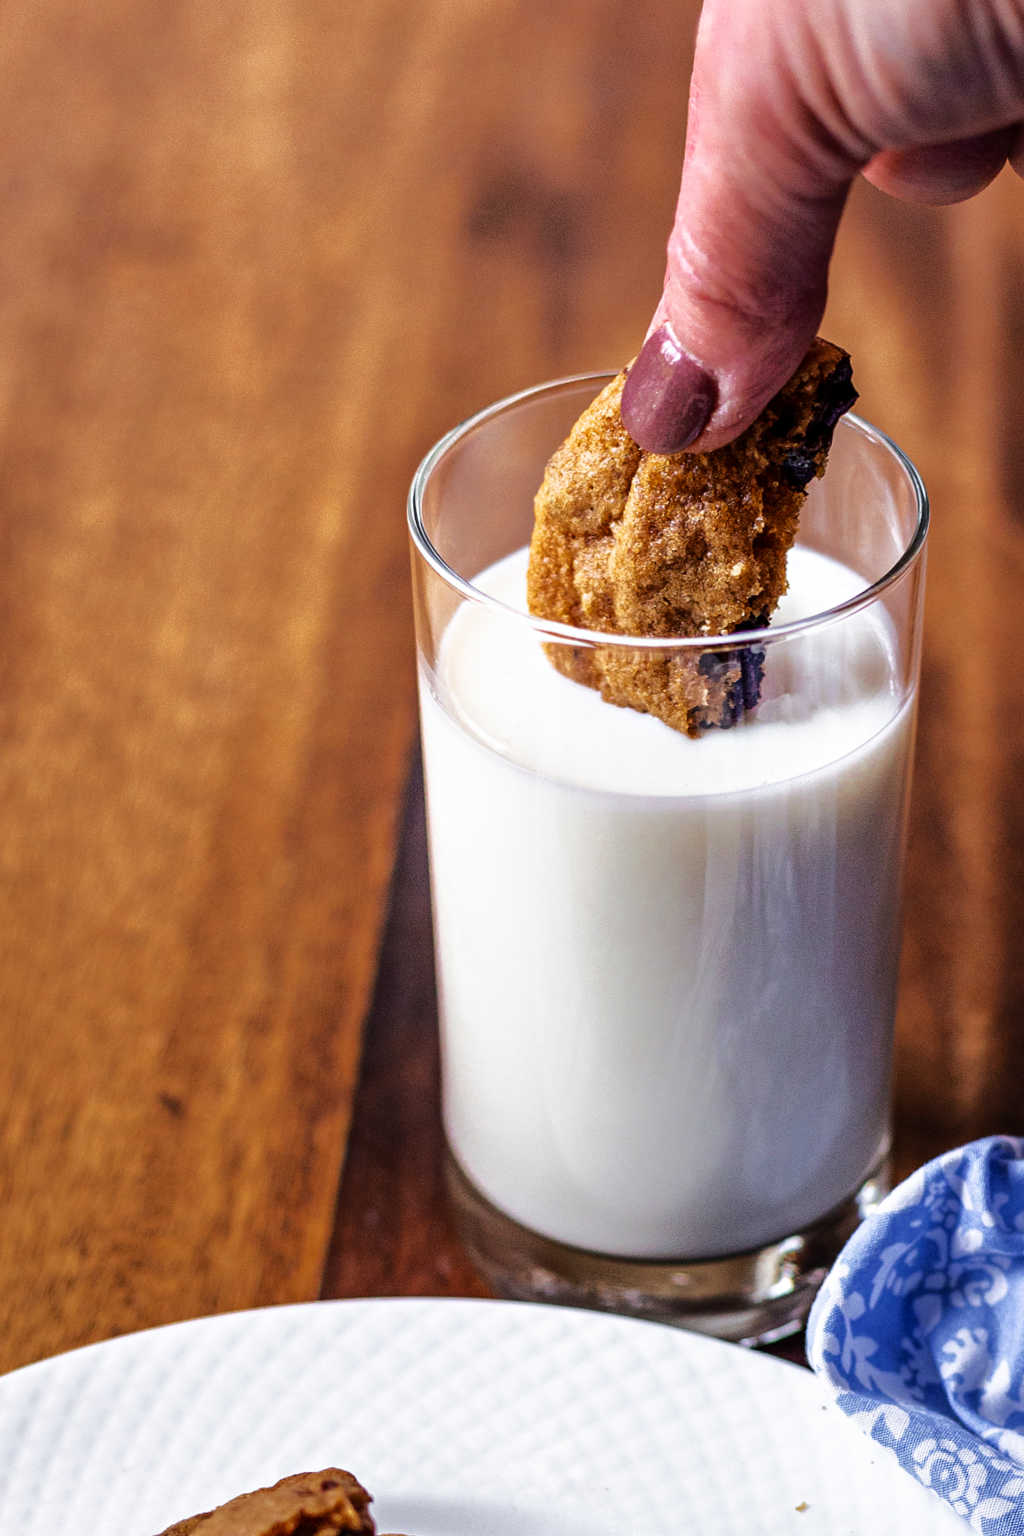 dunking a chocolate chunk cookie in a glass of milk.